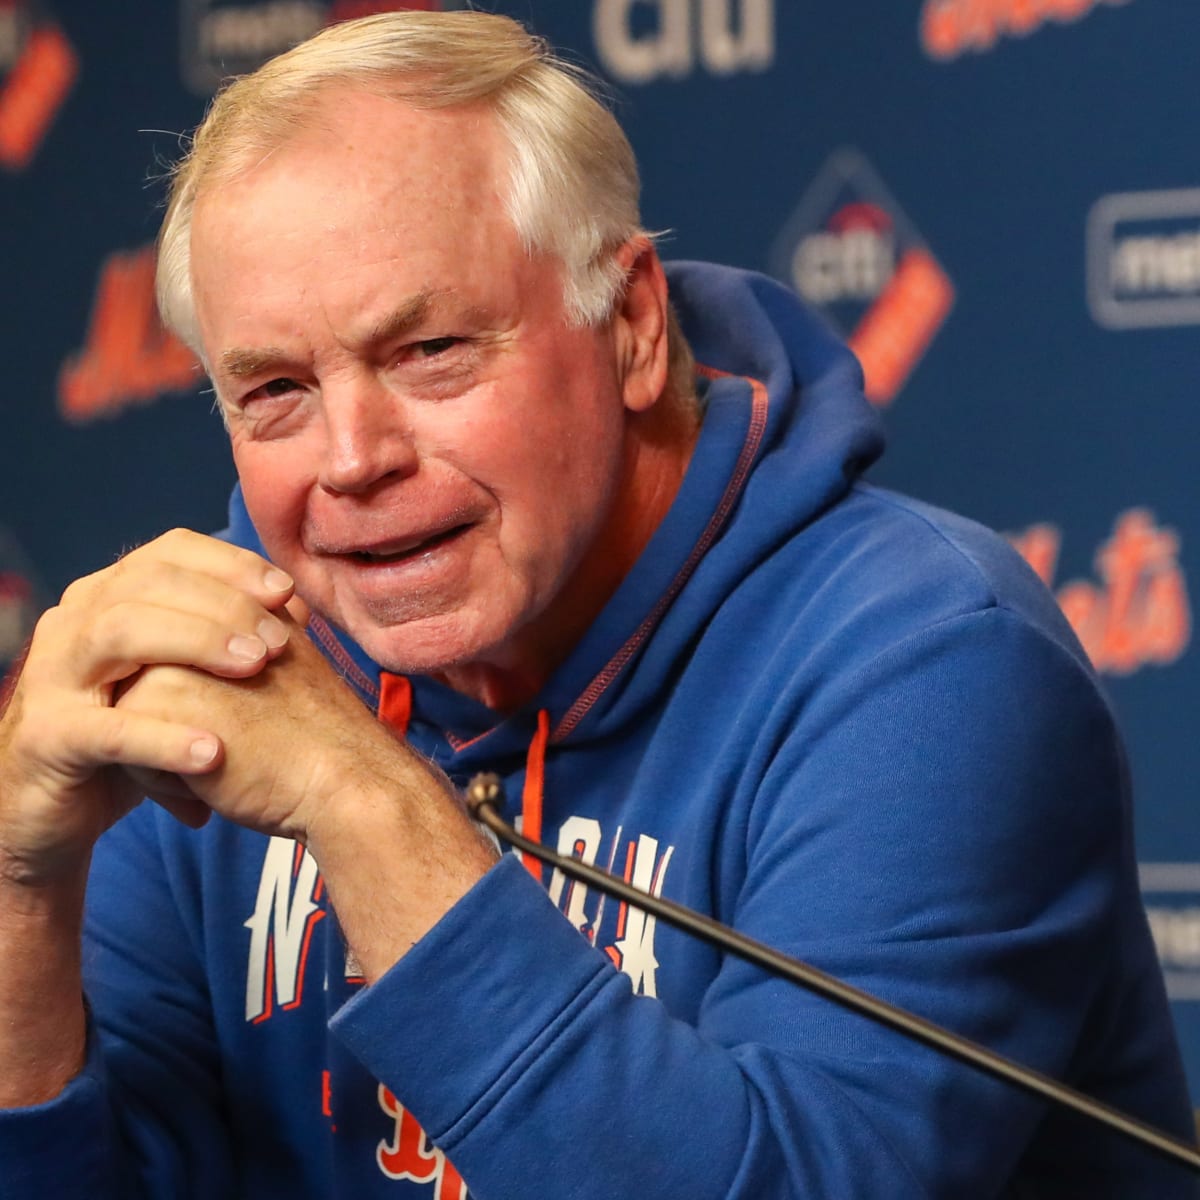 What makes Buck Showalter tick?